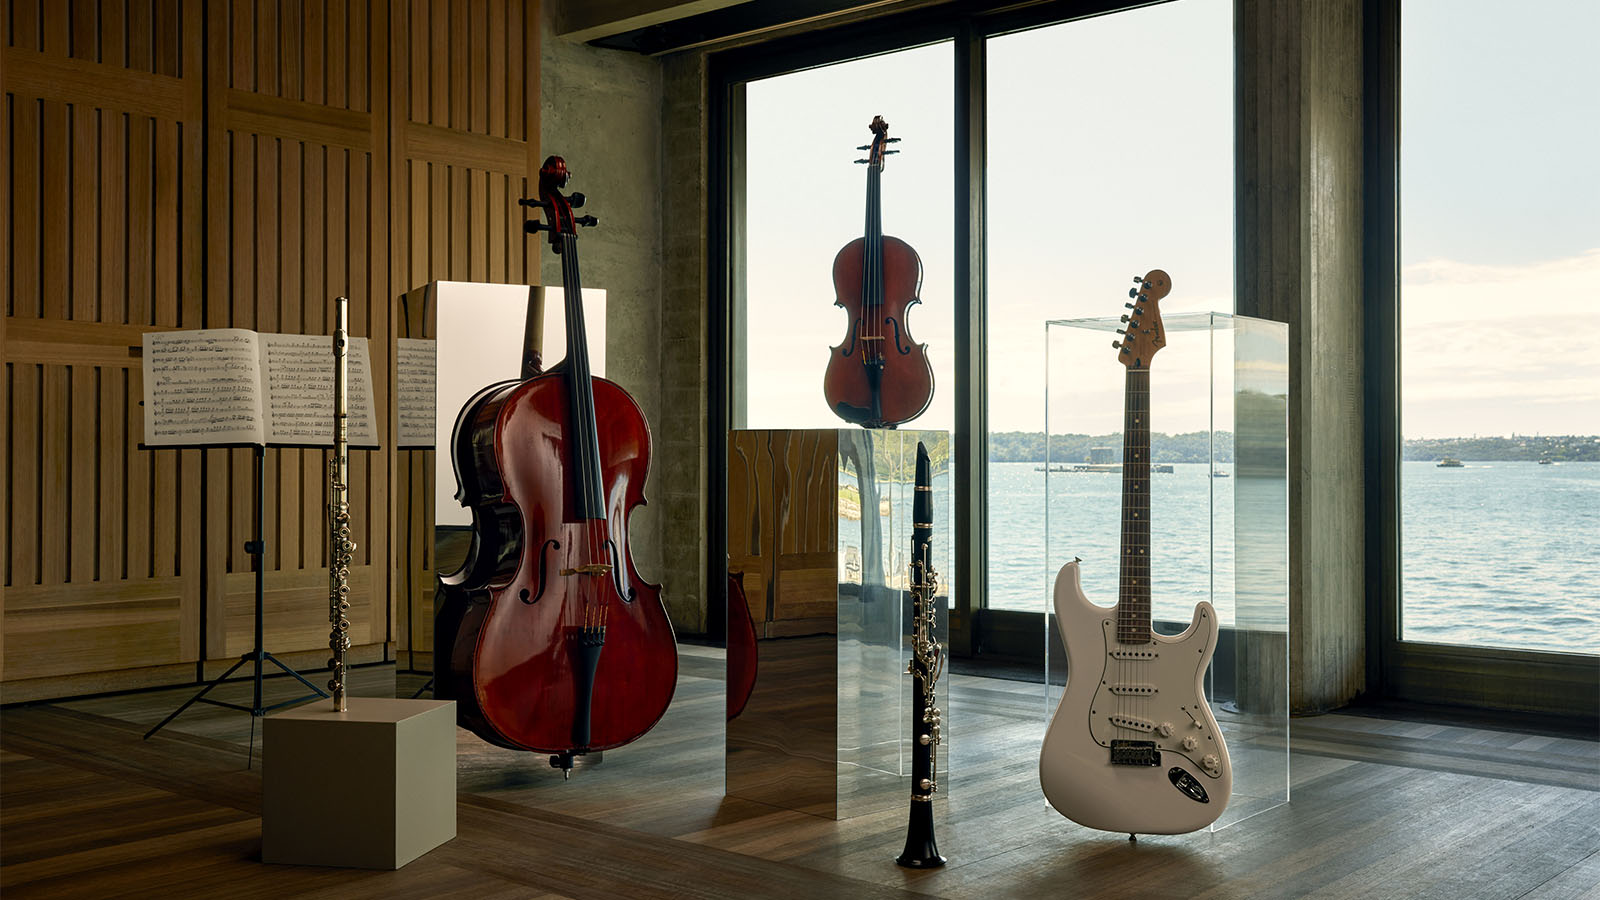 Three string instruments and two flutes showcased in Utzon's room.